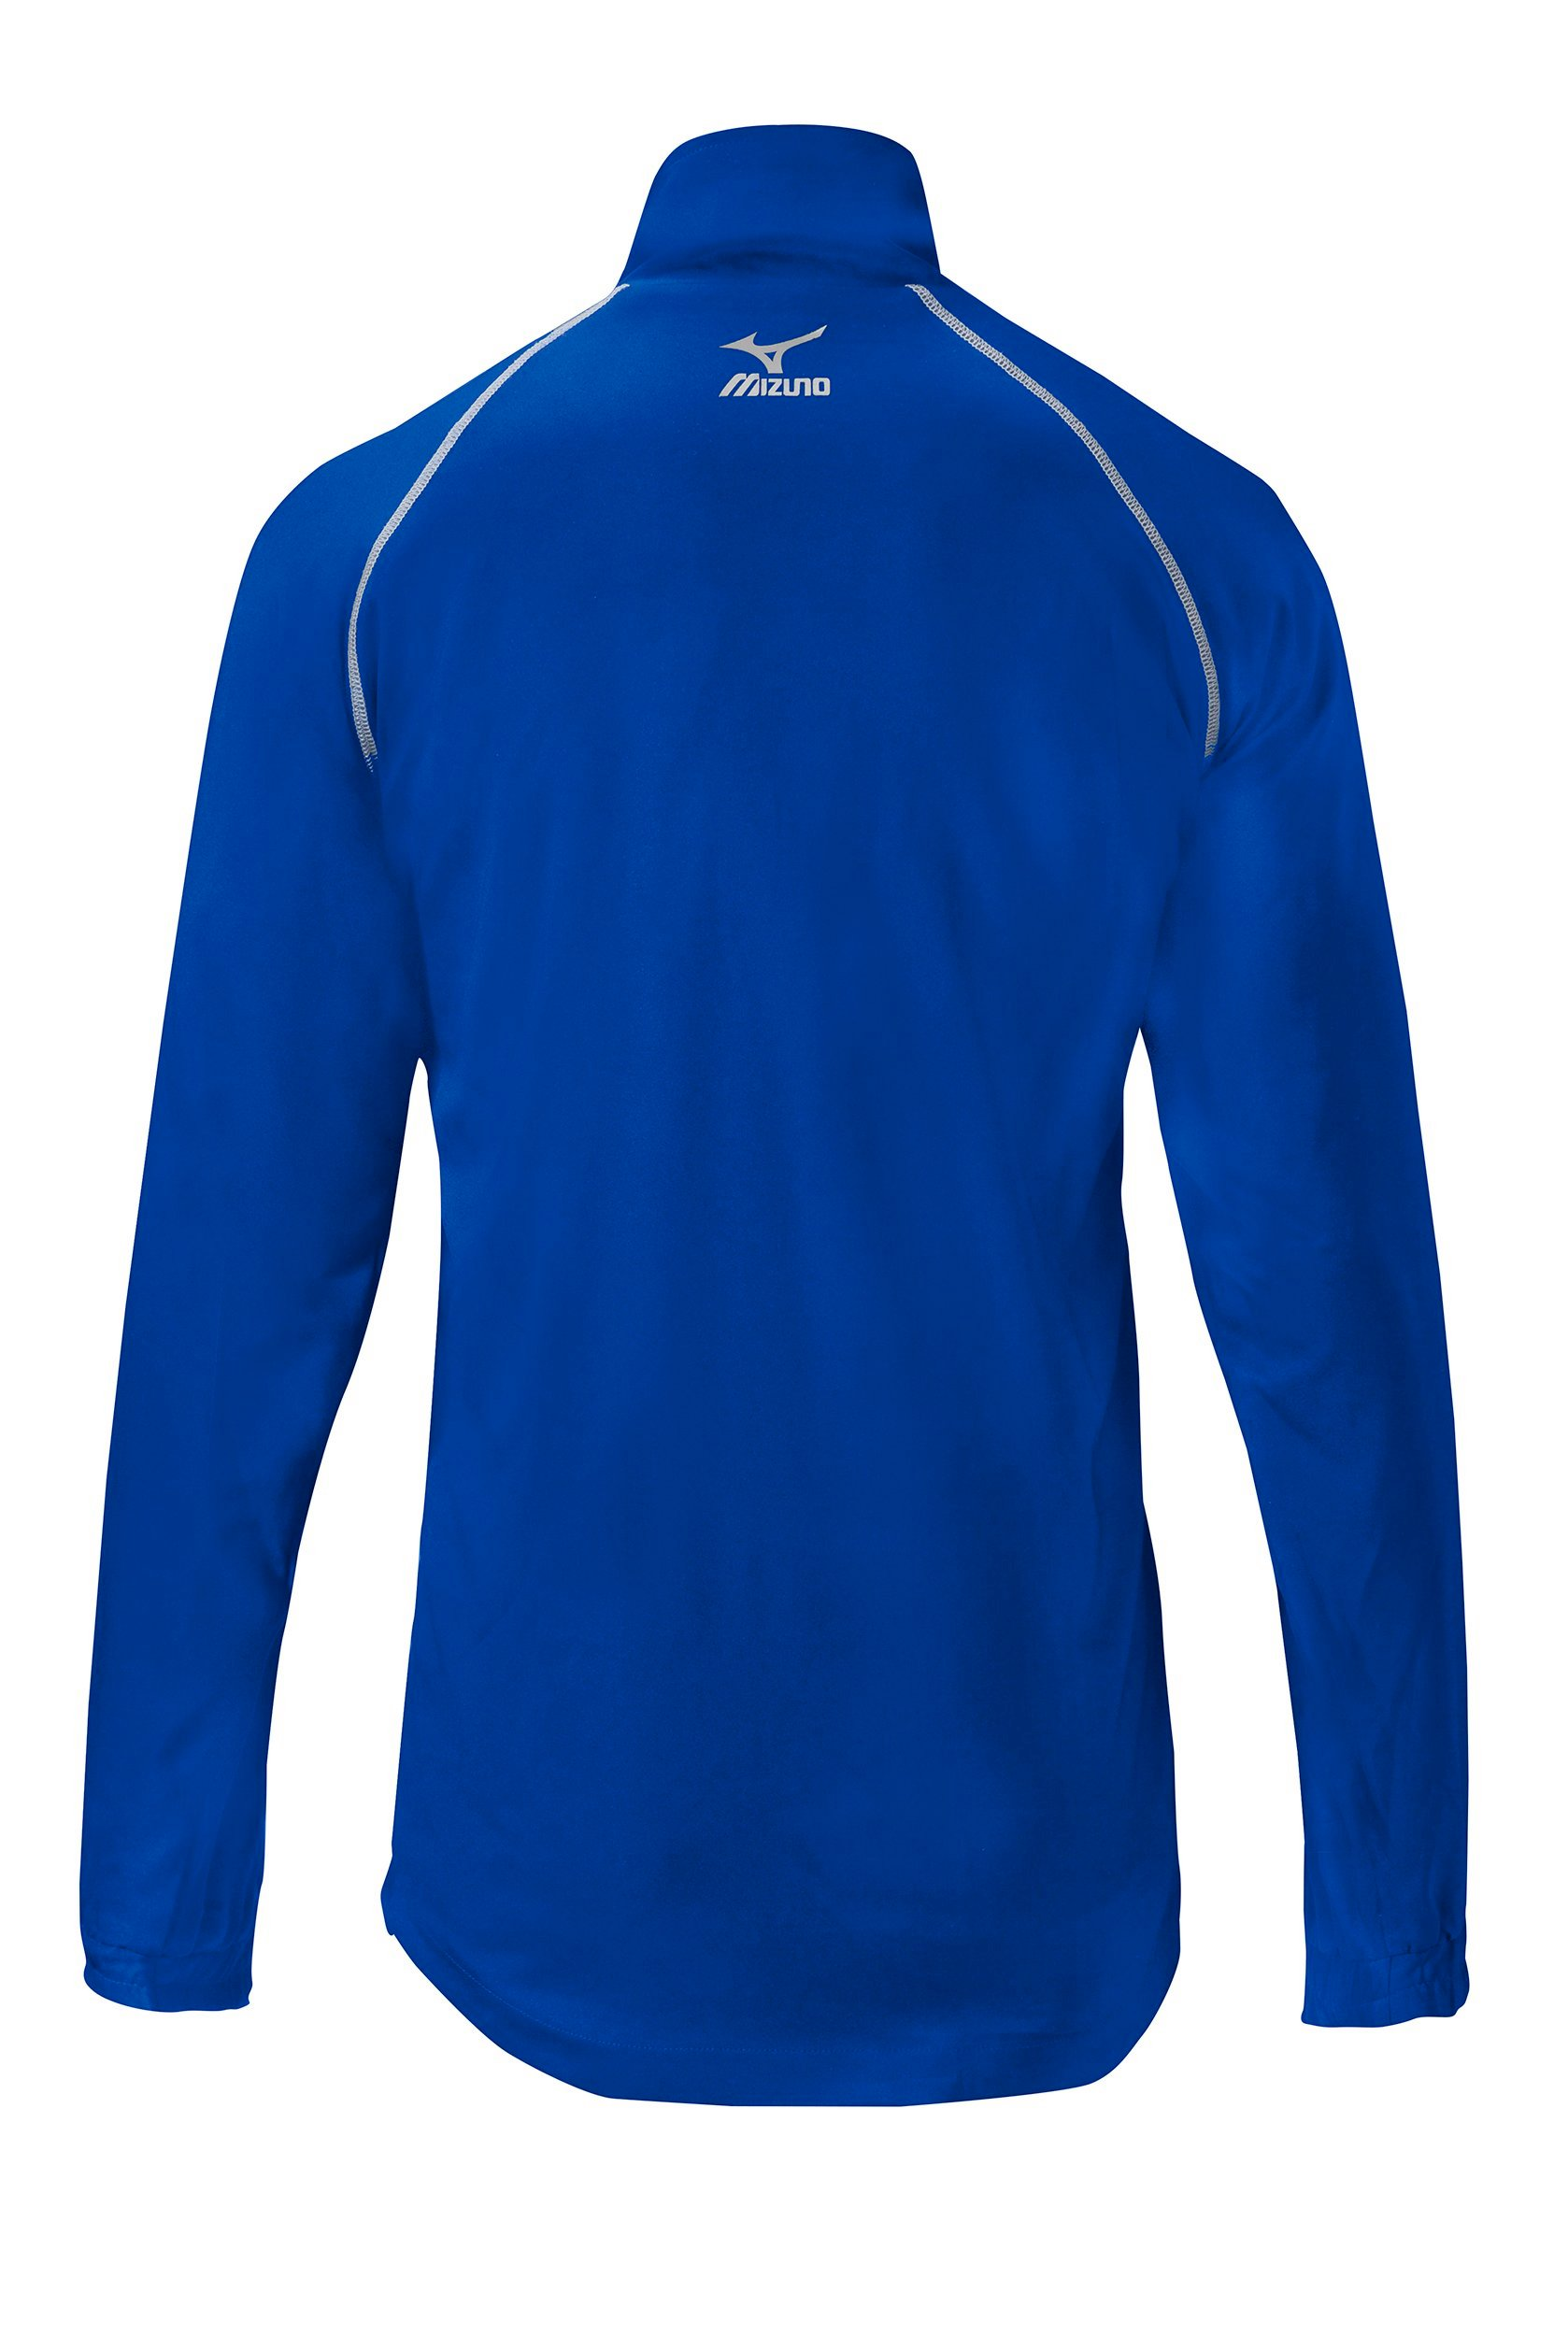 Mizuno Men's Comp 1/4 Zip Pullover, Size Extra Extra Large, Royal (5252) - image 2 of 3